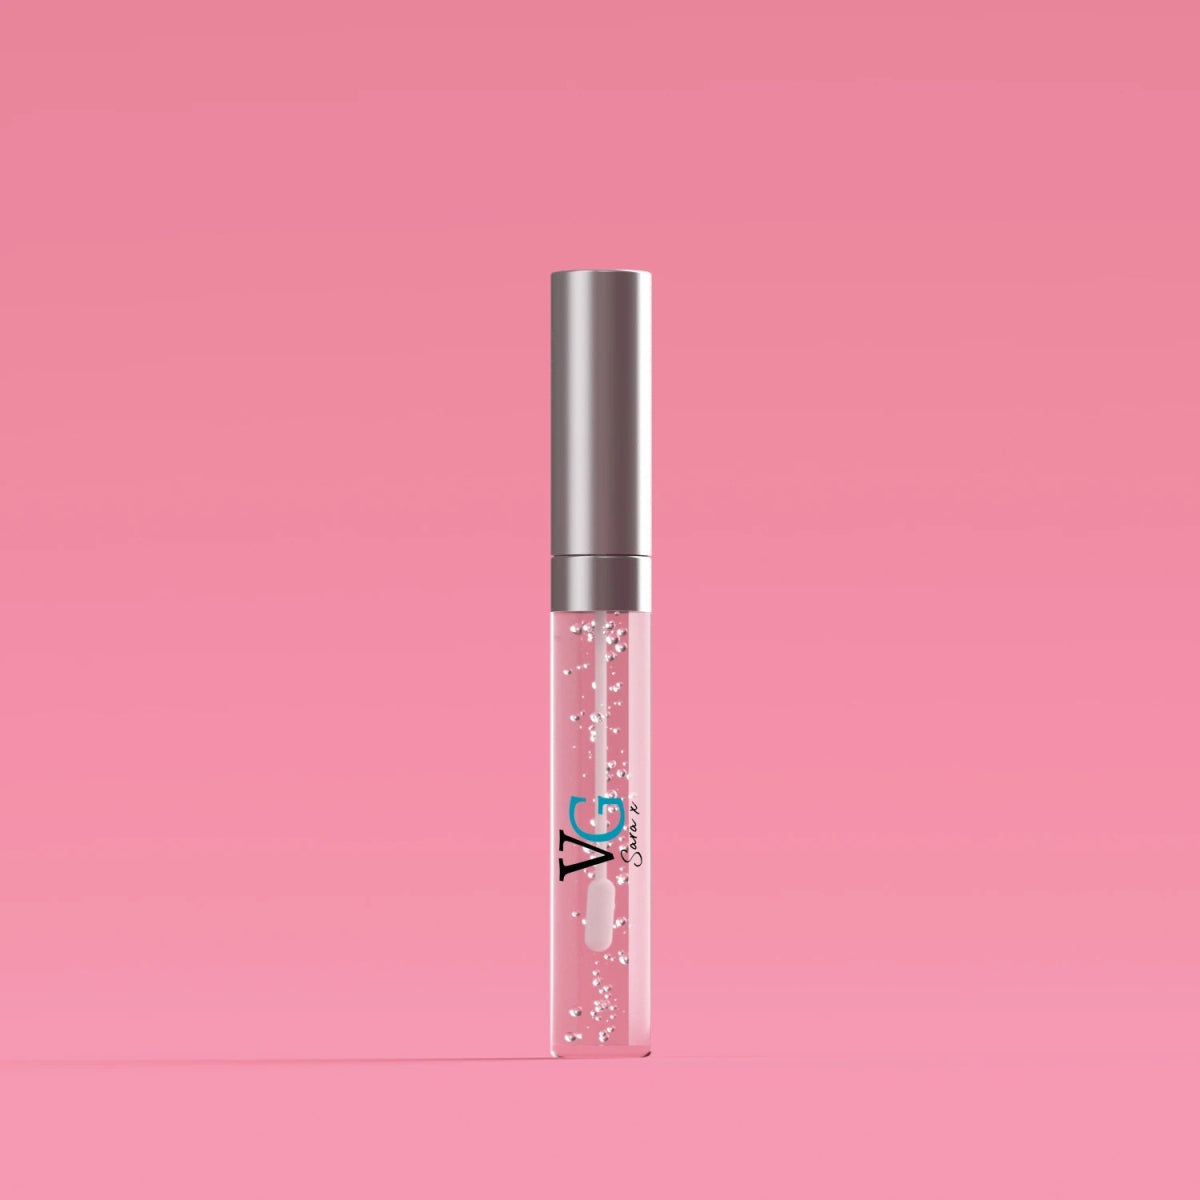 Cinnamon Lip Plumper tube displayed against a soft pink backdrop